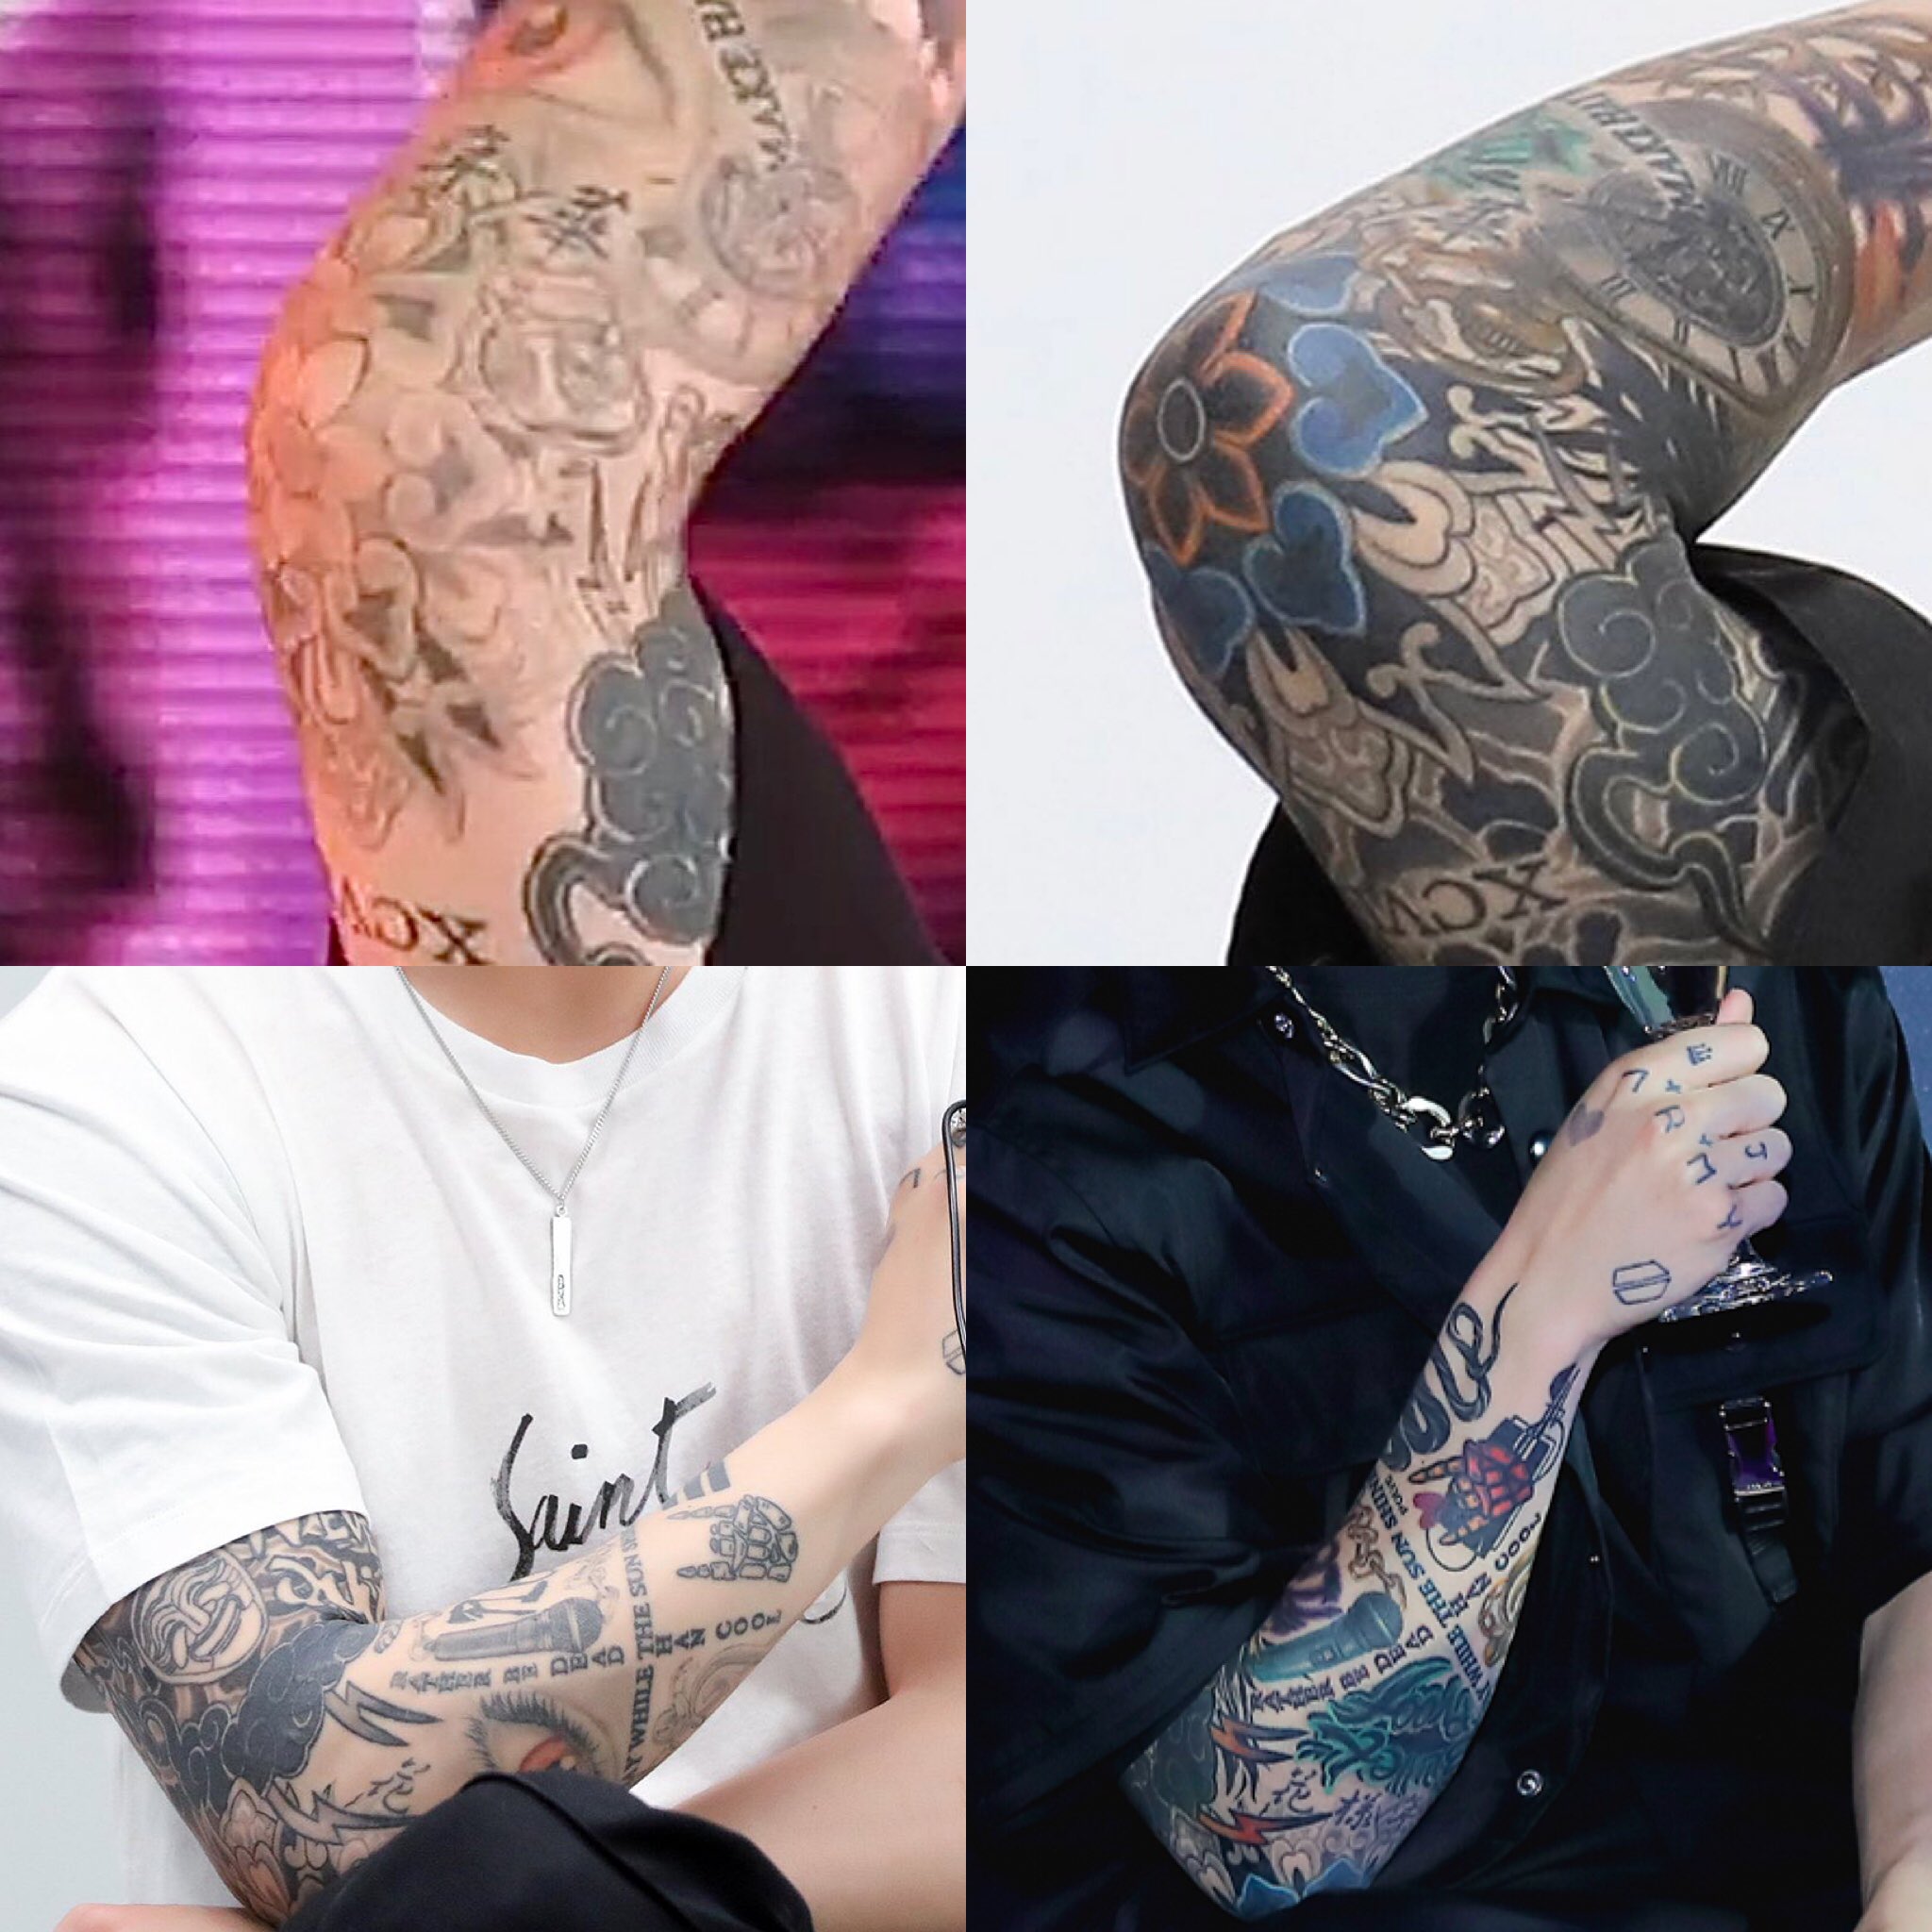 BTS Jungkook flaunts 7 friendship tattoo in addition to cover up  designs sends ARMY into a frenzy